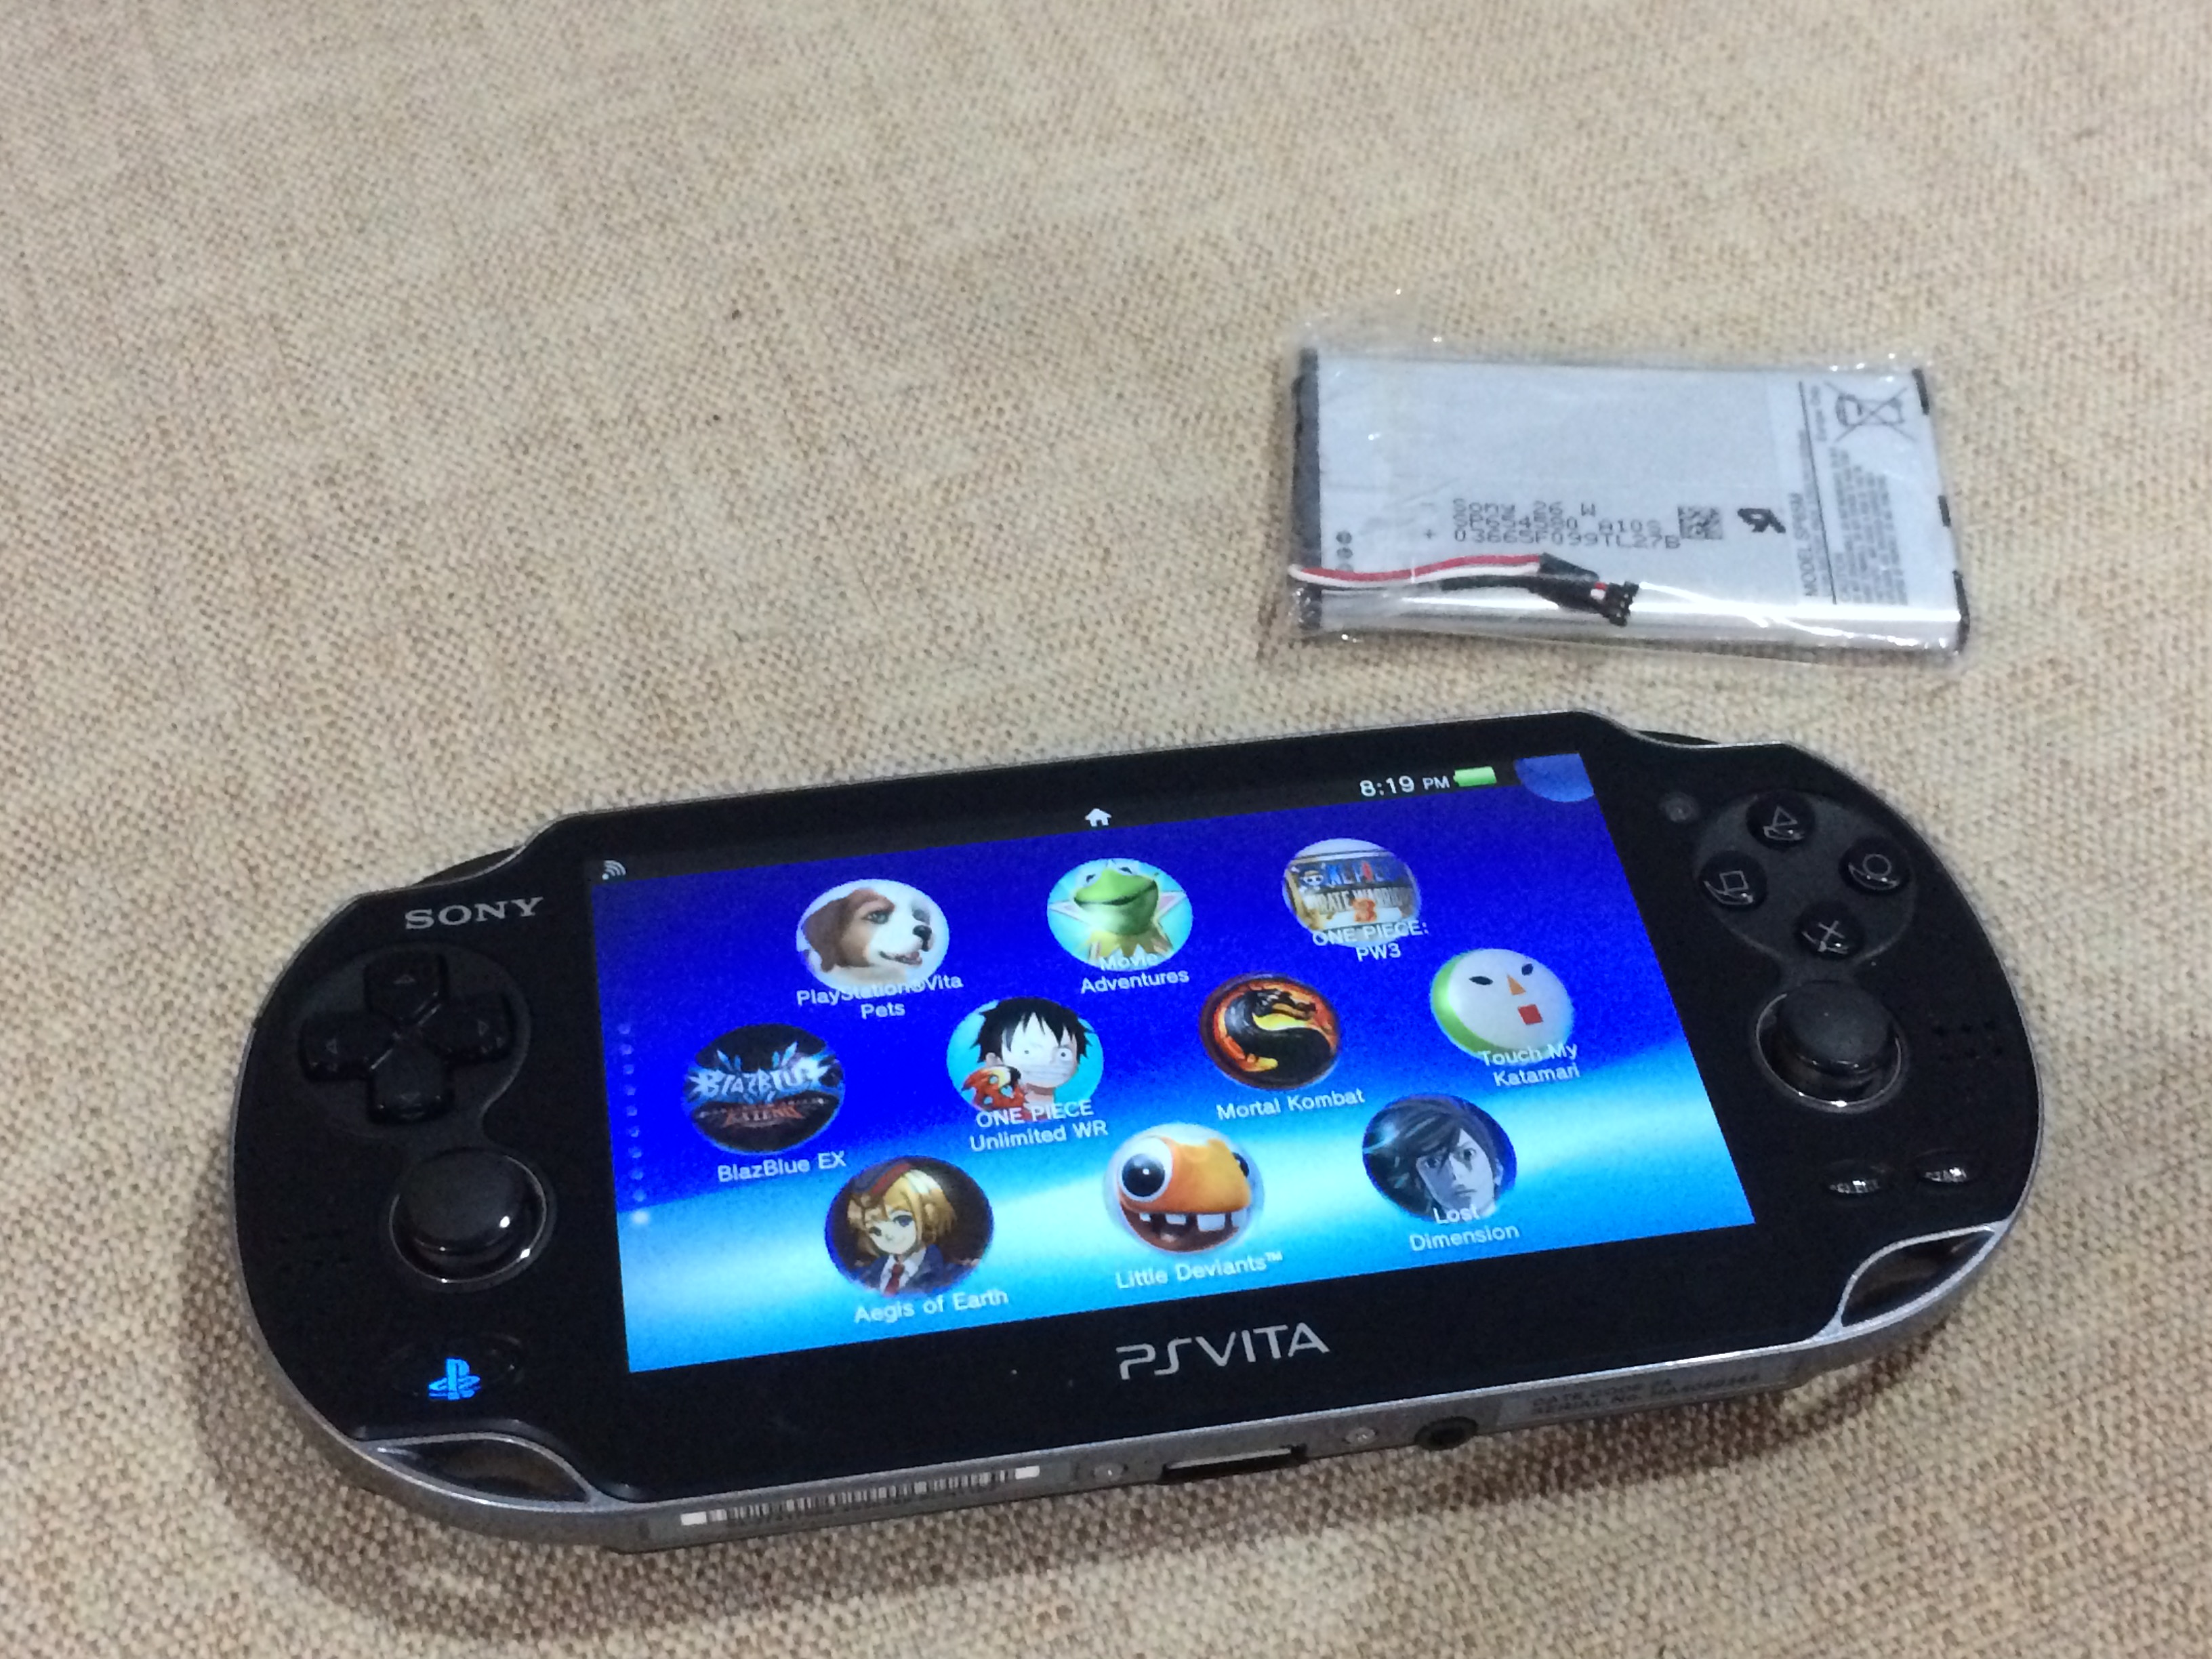 Shmup Wii 3ds And Vita Collector Today I Finally Swapped My Vita Battery It No Longer Held Charge This Vita Ive Owned Since New In 12 Its Very Clean And Im Glad